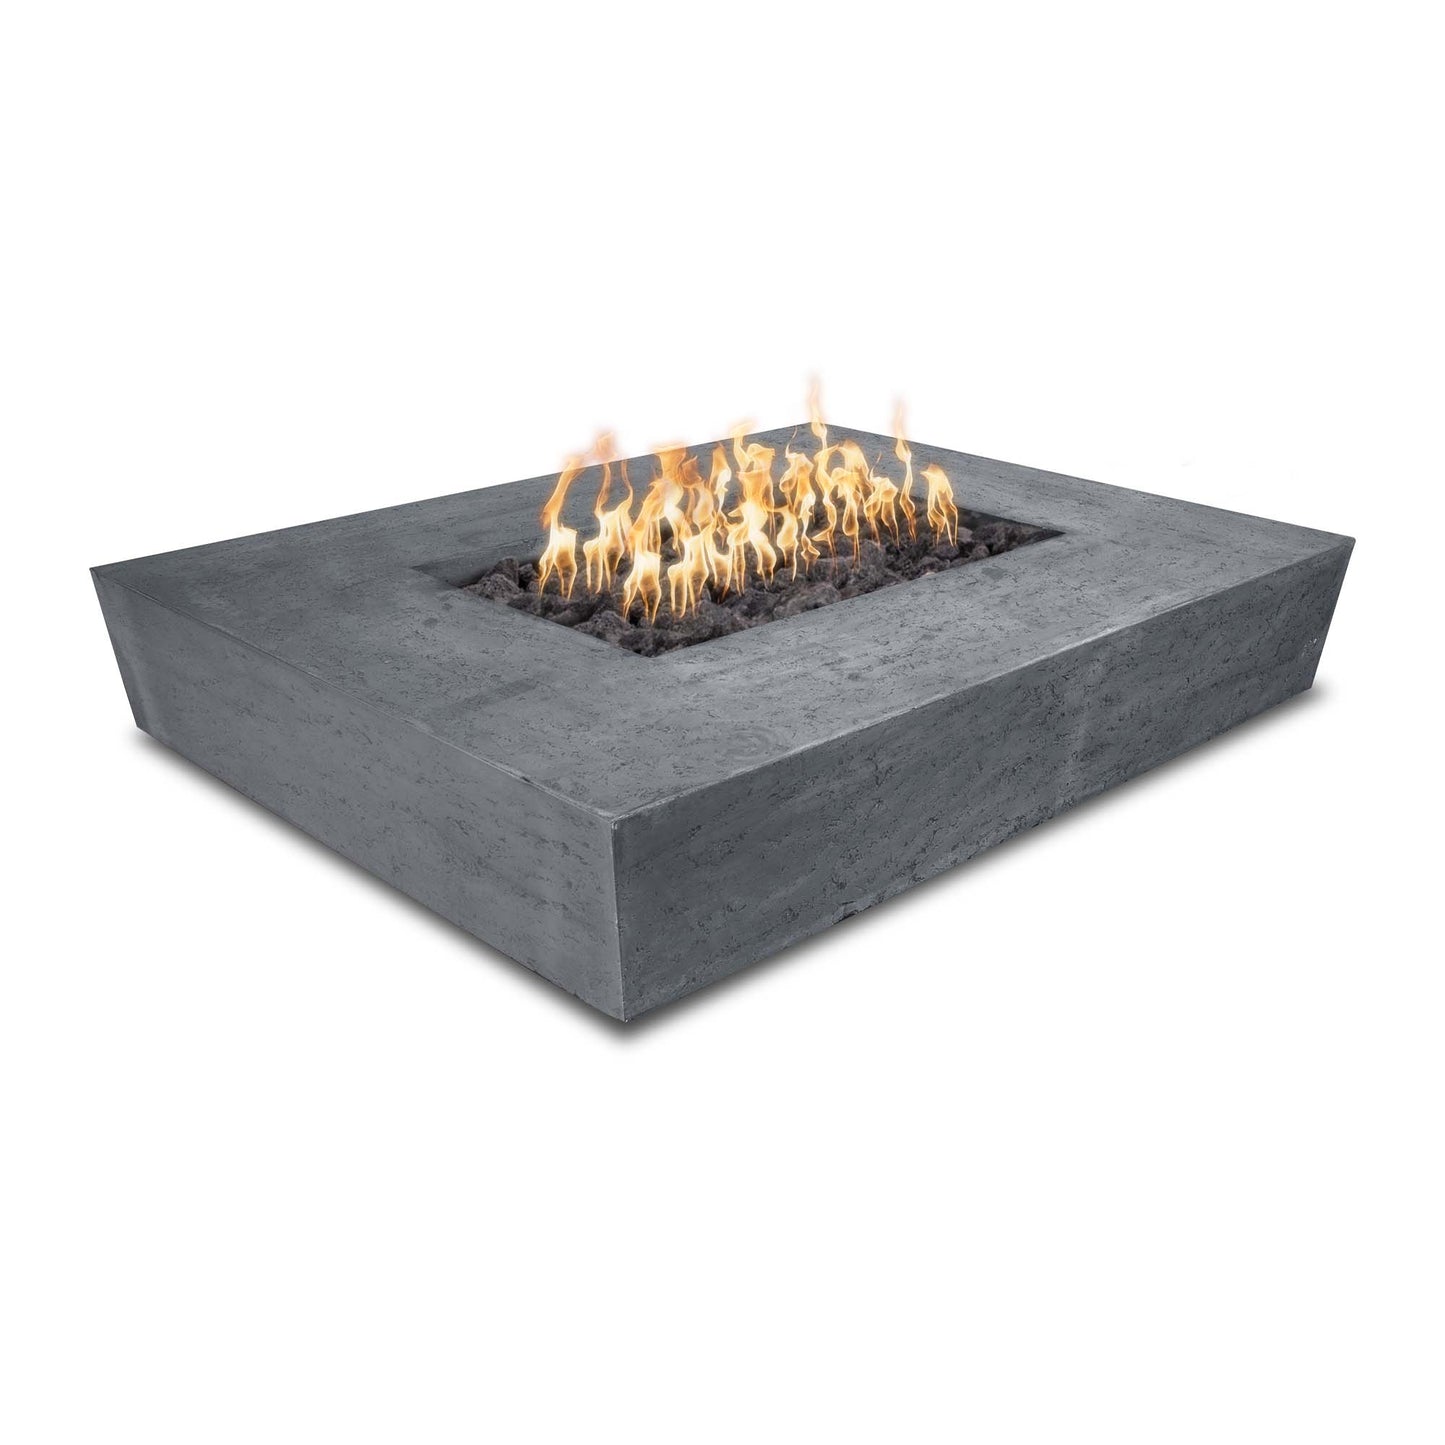 The Outdoor Plus Rectangular Heiko 58" Brown GFRC Concrete Liquid Propane Fire Pit with 110V Electronic Ignition